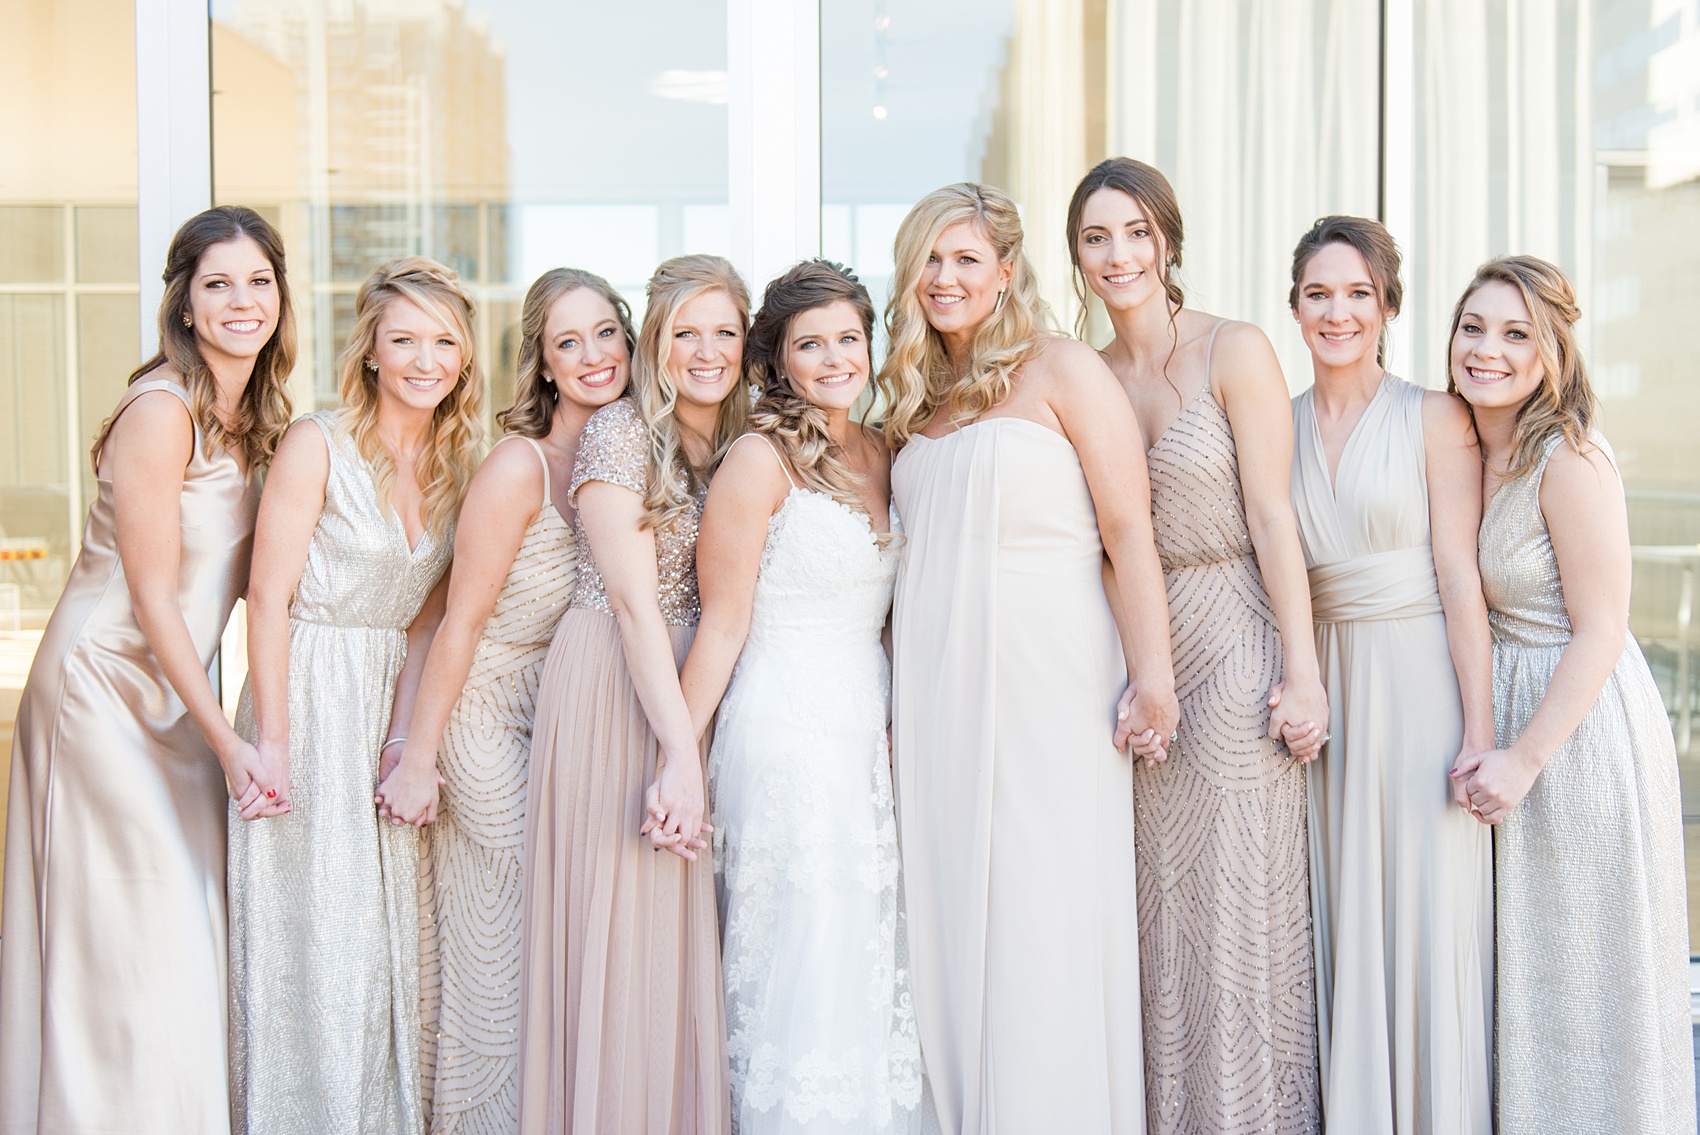 Pictures from a Christmas inspired wedding in downtown Raleigh, North Carolina by Mikkel Paige Photography. The bridesmaids got ready at The Glass Box and wore mismatched pink gowns. Click through for more ideas from a beautiful celebration, including decor photos in a green and gold decor palette for their reception at The Stockroom at 230. #mikkelpaige #raleighweddingphotographer #downtownRaleigh #weddingparty #bridalparty #pinkbridesmaids #sequingowns #winterwedding